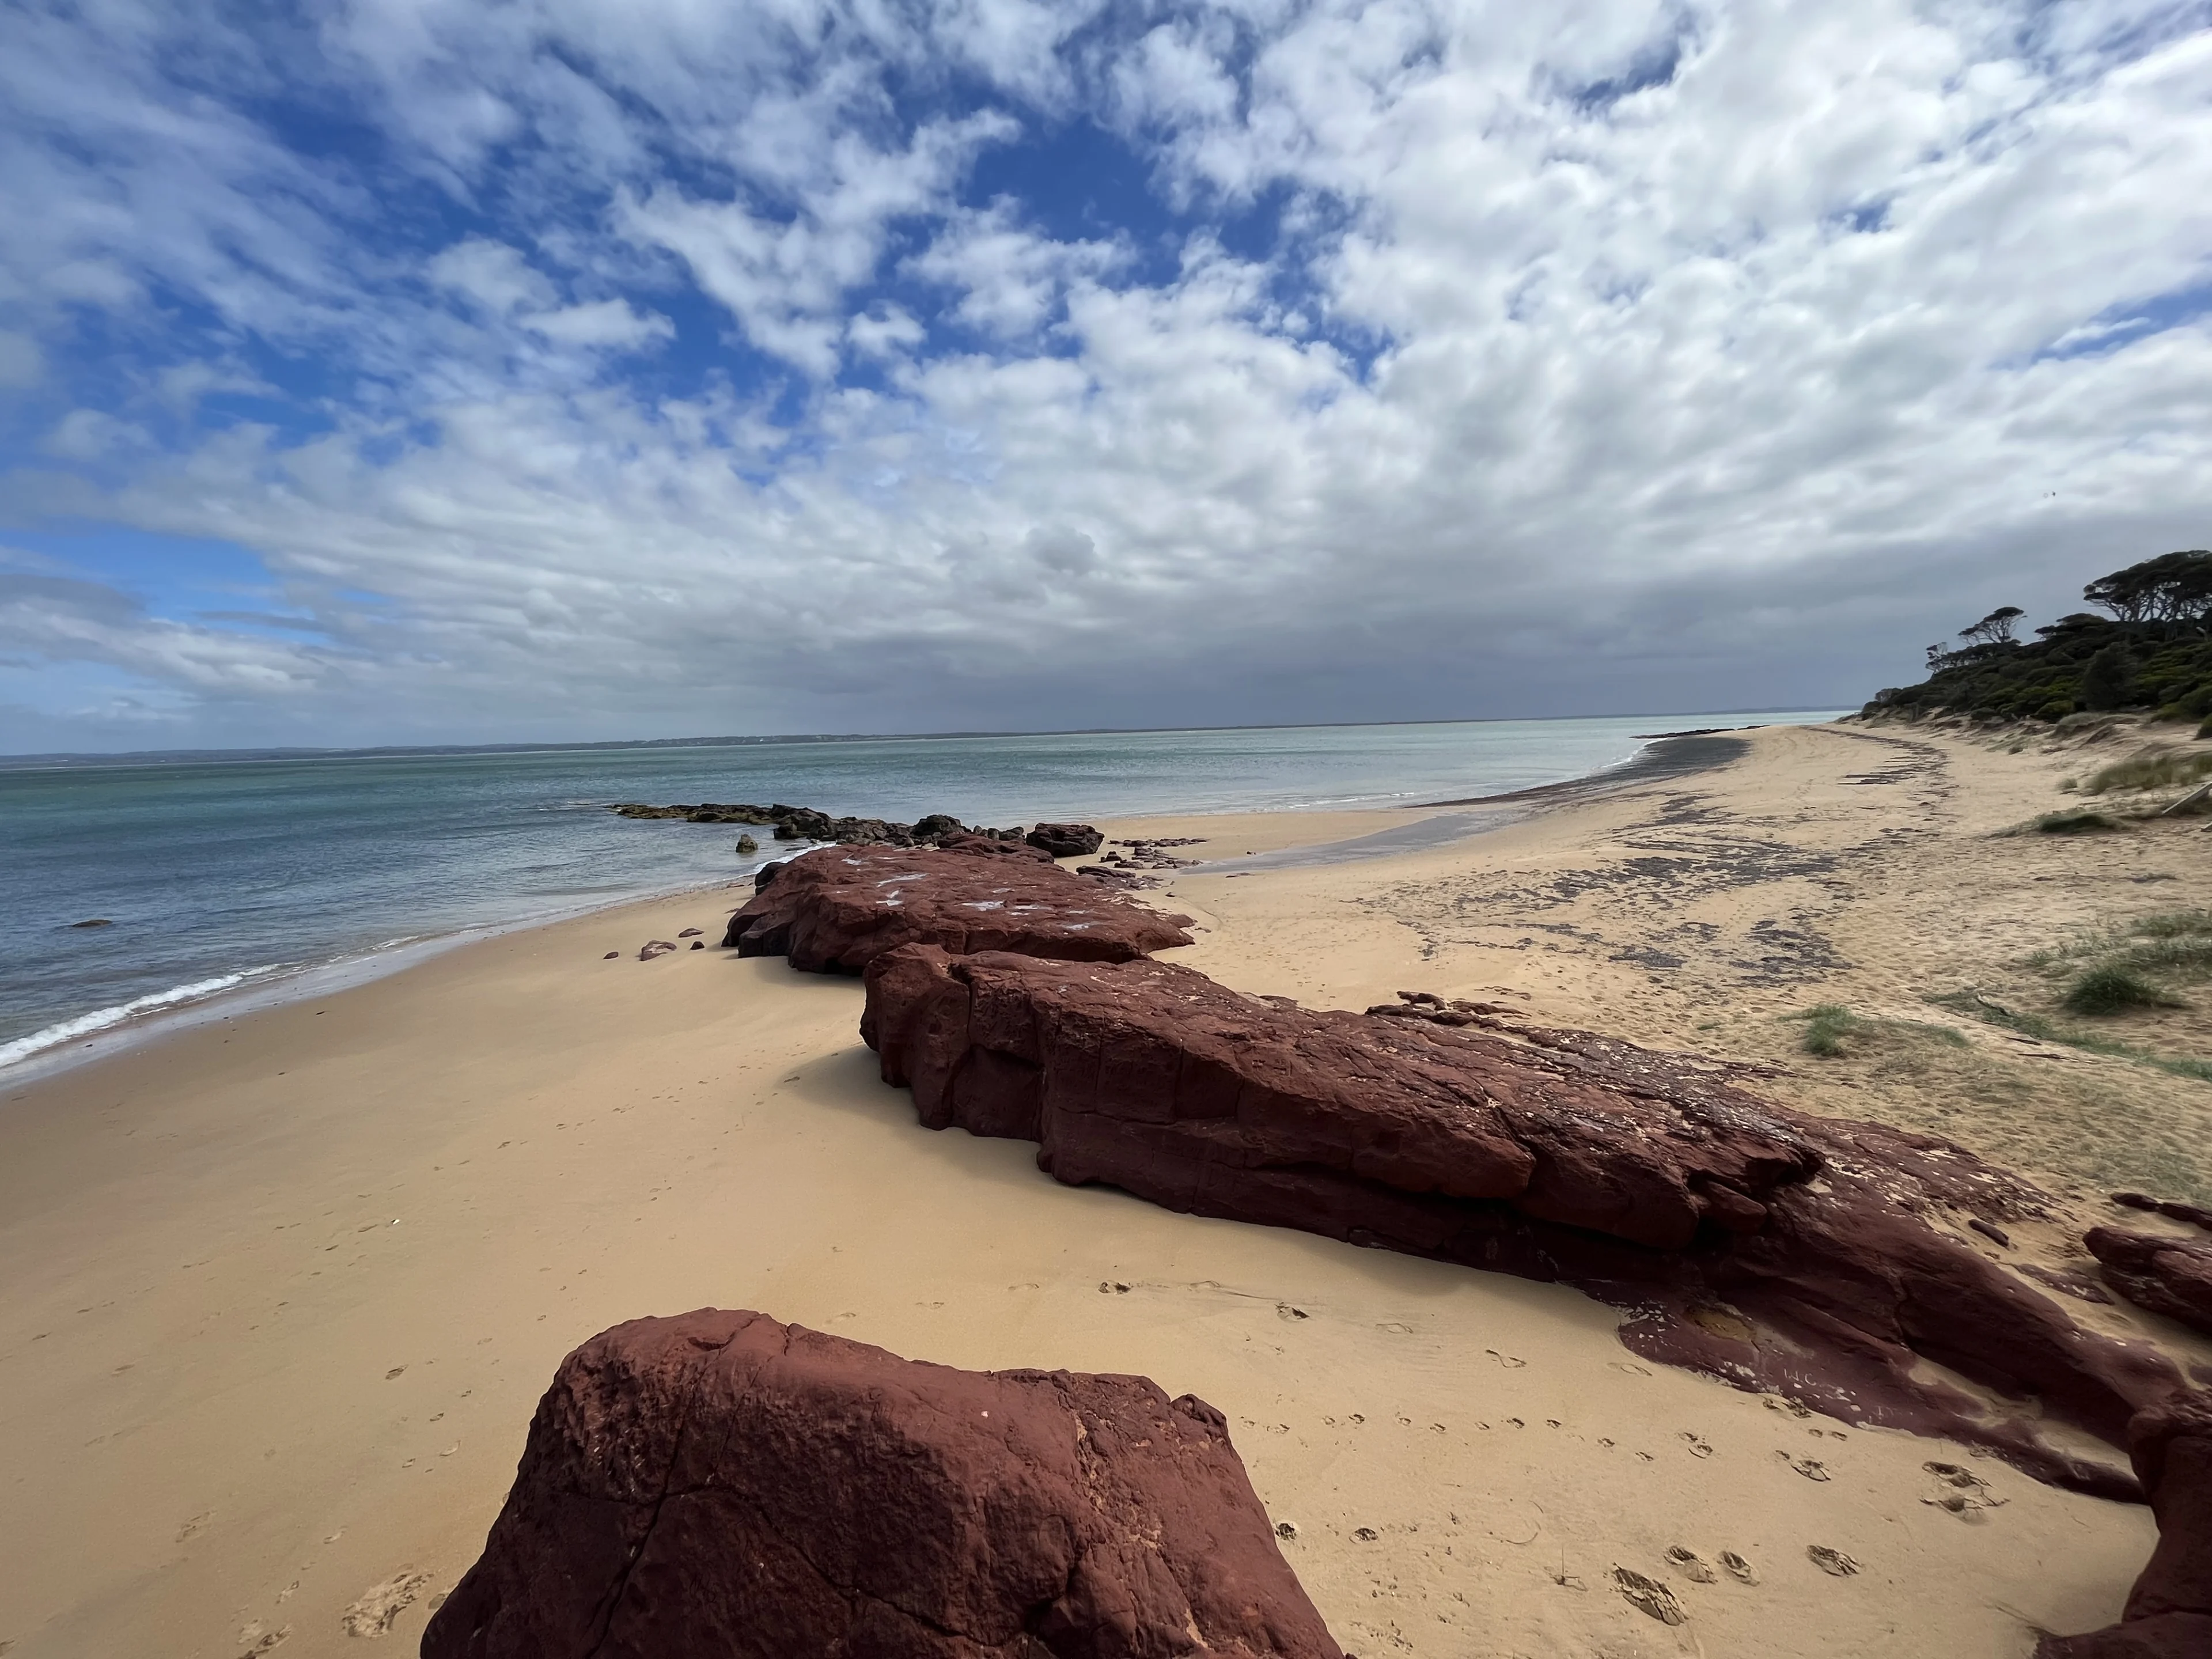 Red Rock Beach between Cowes and Ventnor on Phillip Island, Victoria.